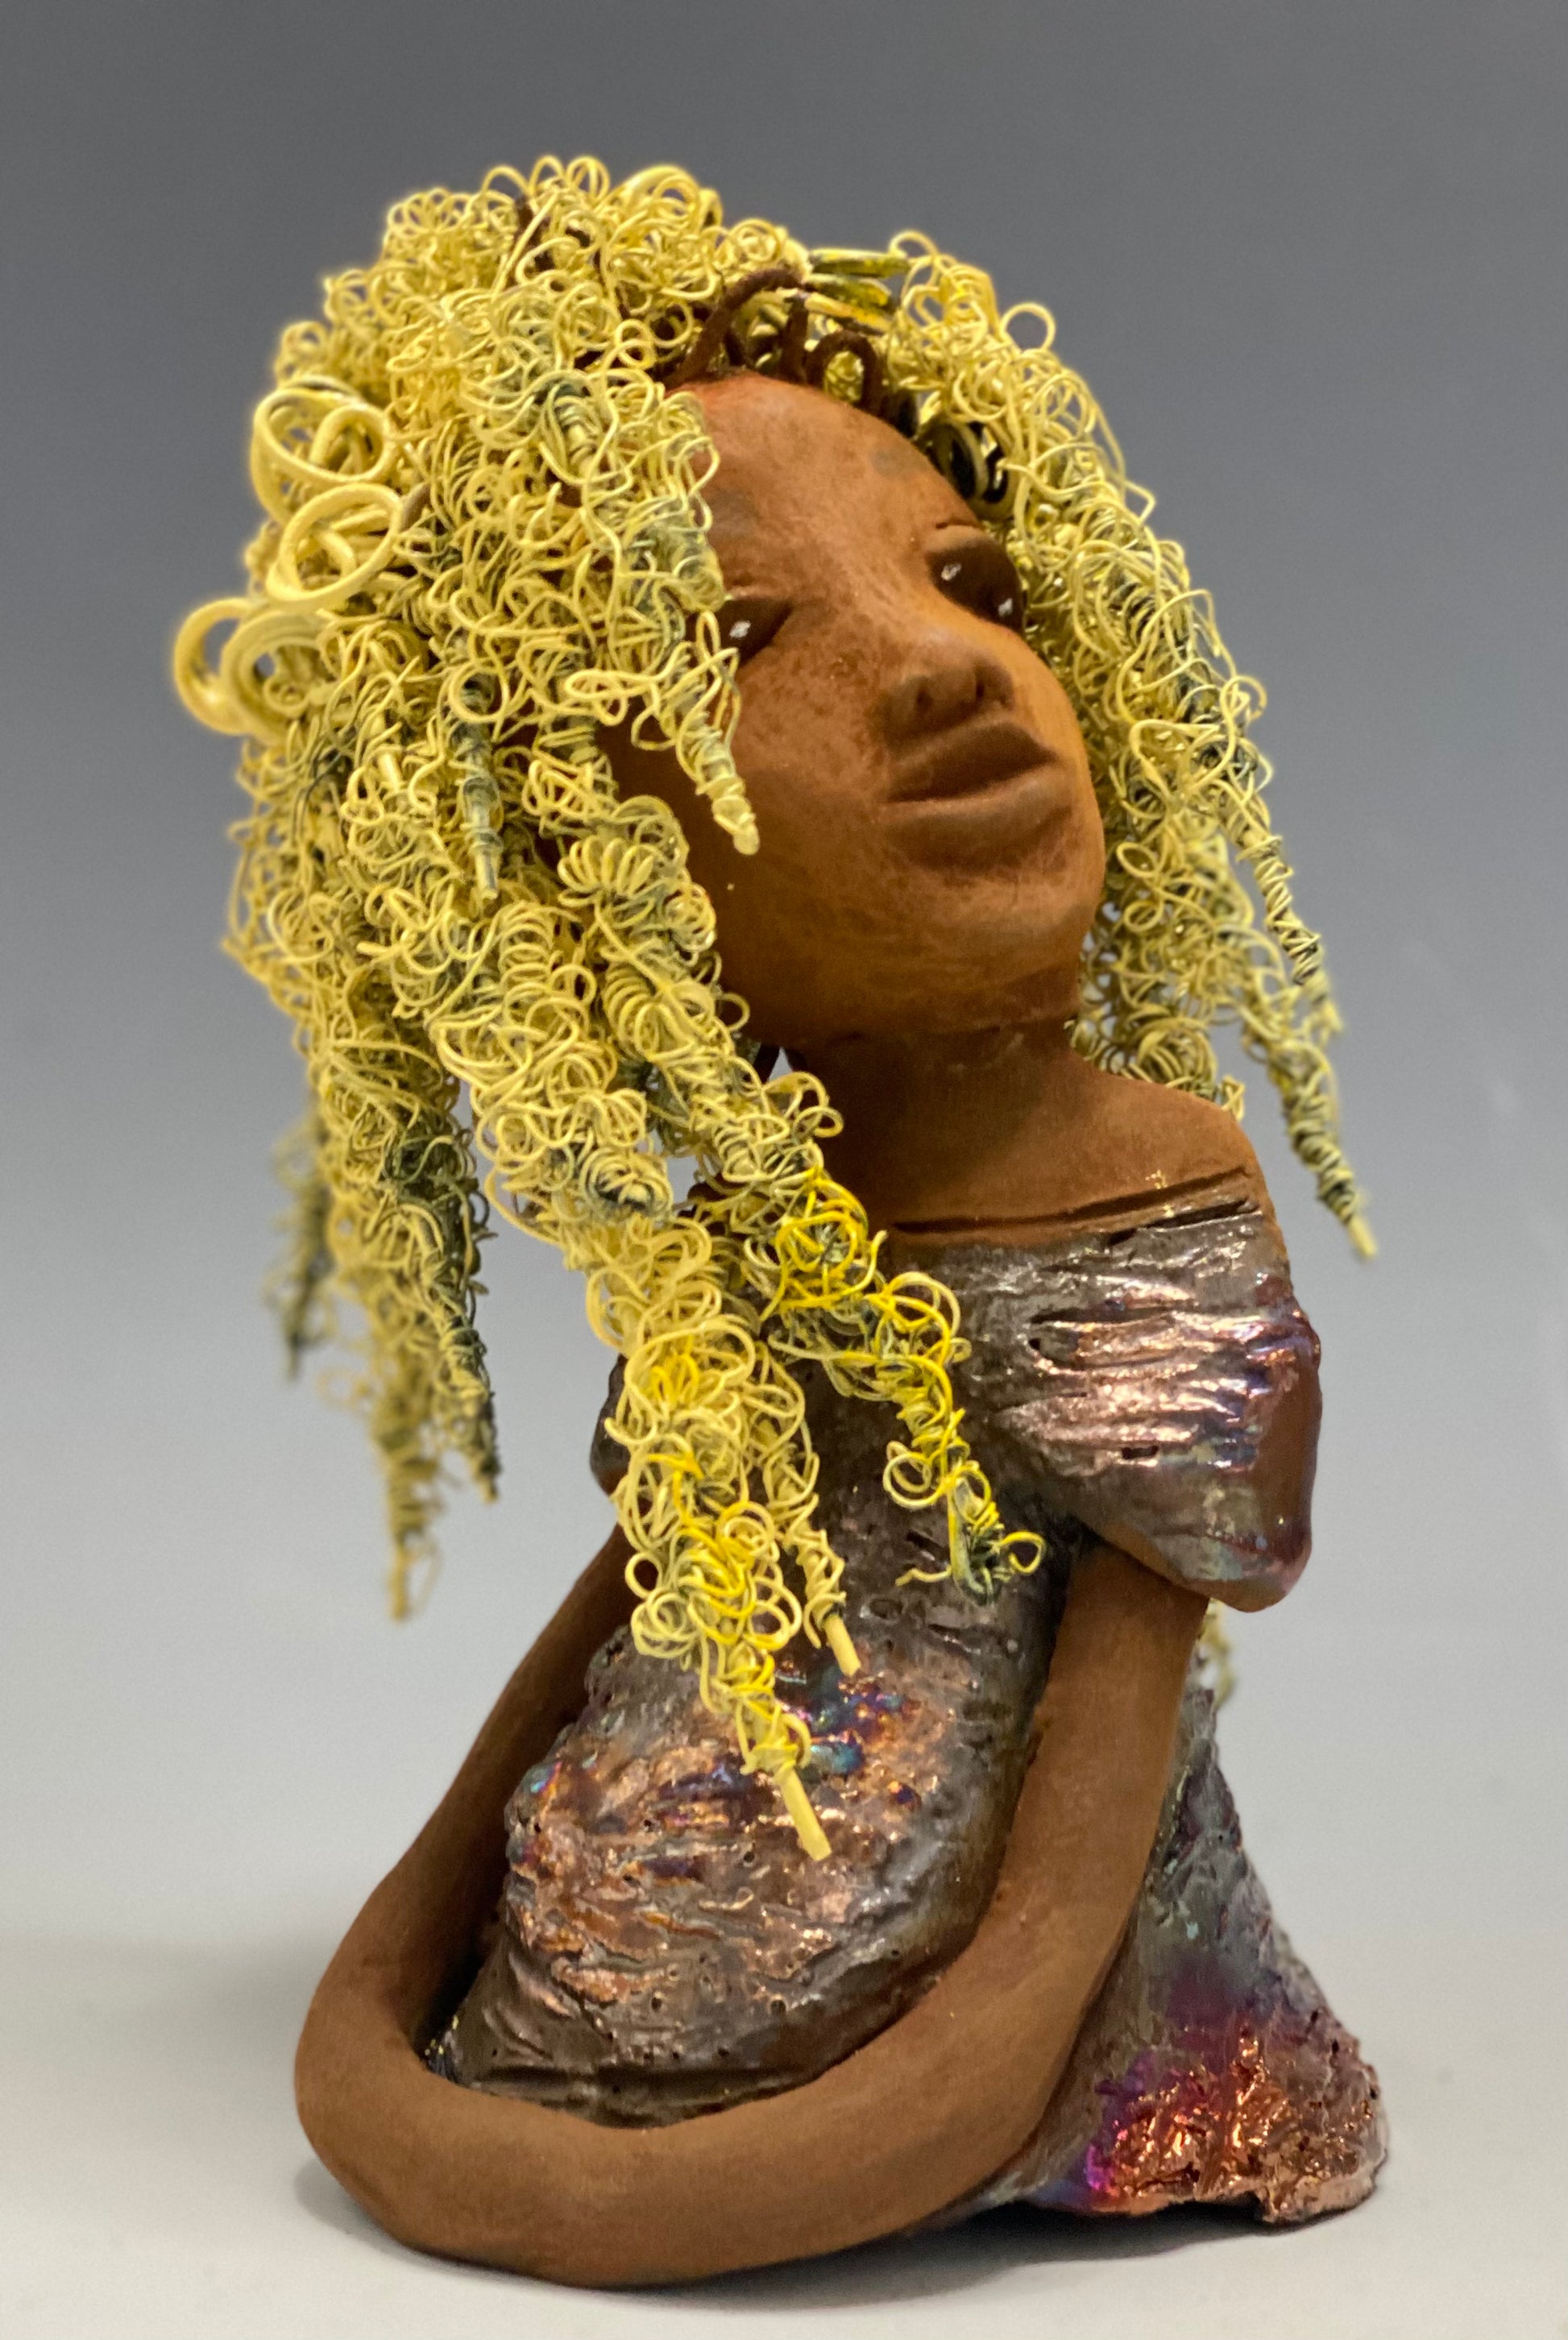 Valorie stands 8" x 4.5" x 4.5" and weighs 1.05 lbs. She has a lovely honey brown complexion with cocoa brown lips. She has long twisted wire locs hairstyle waist down!  Valorie has a metallic  copper antique glazed dress. She has over 75 feet of 16 and 24 gauge  pale yellow wire for hair. It took over 7 hours just to do her hair! With  eyes wide opened, Valorie has hope of finding a new home.   